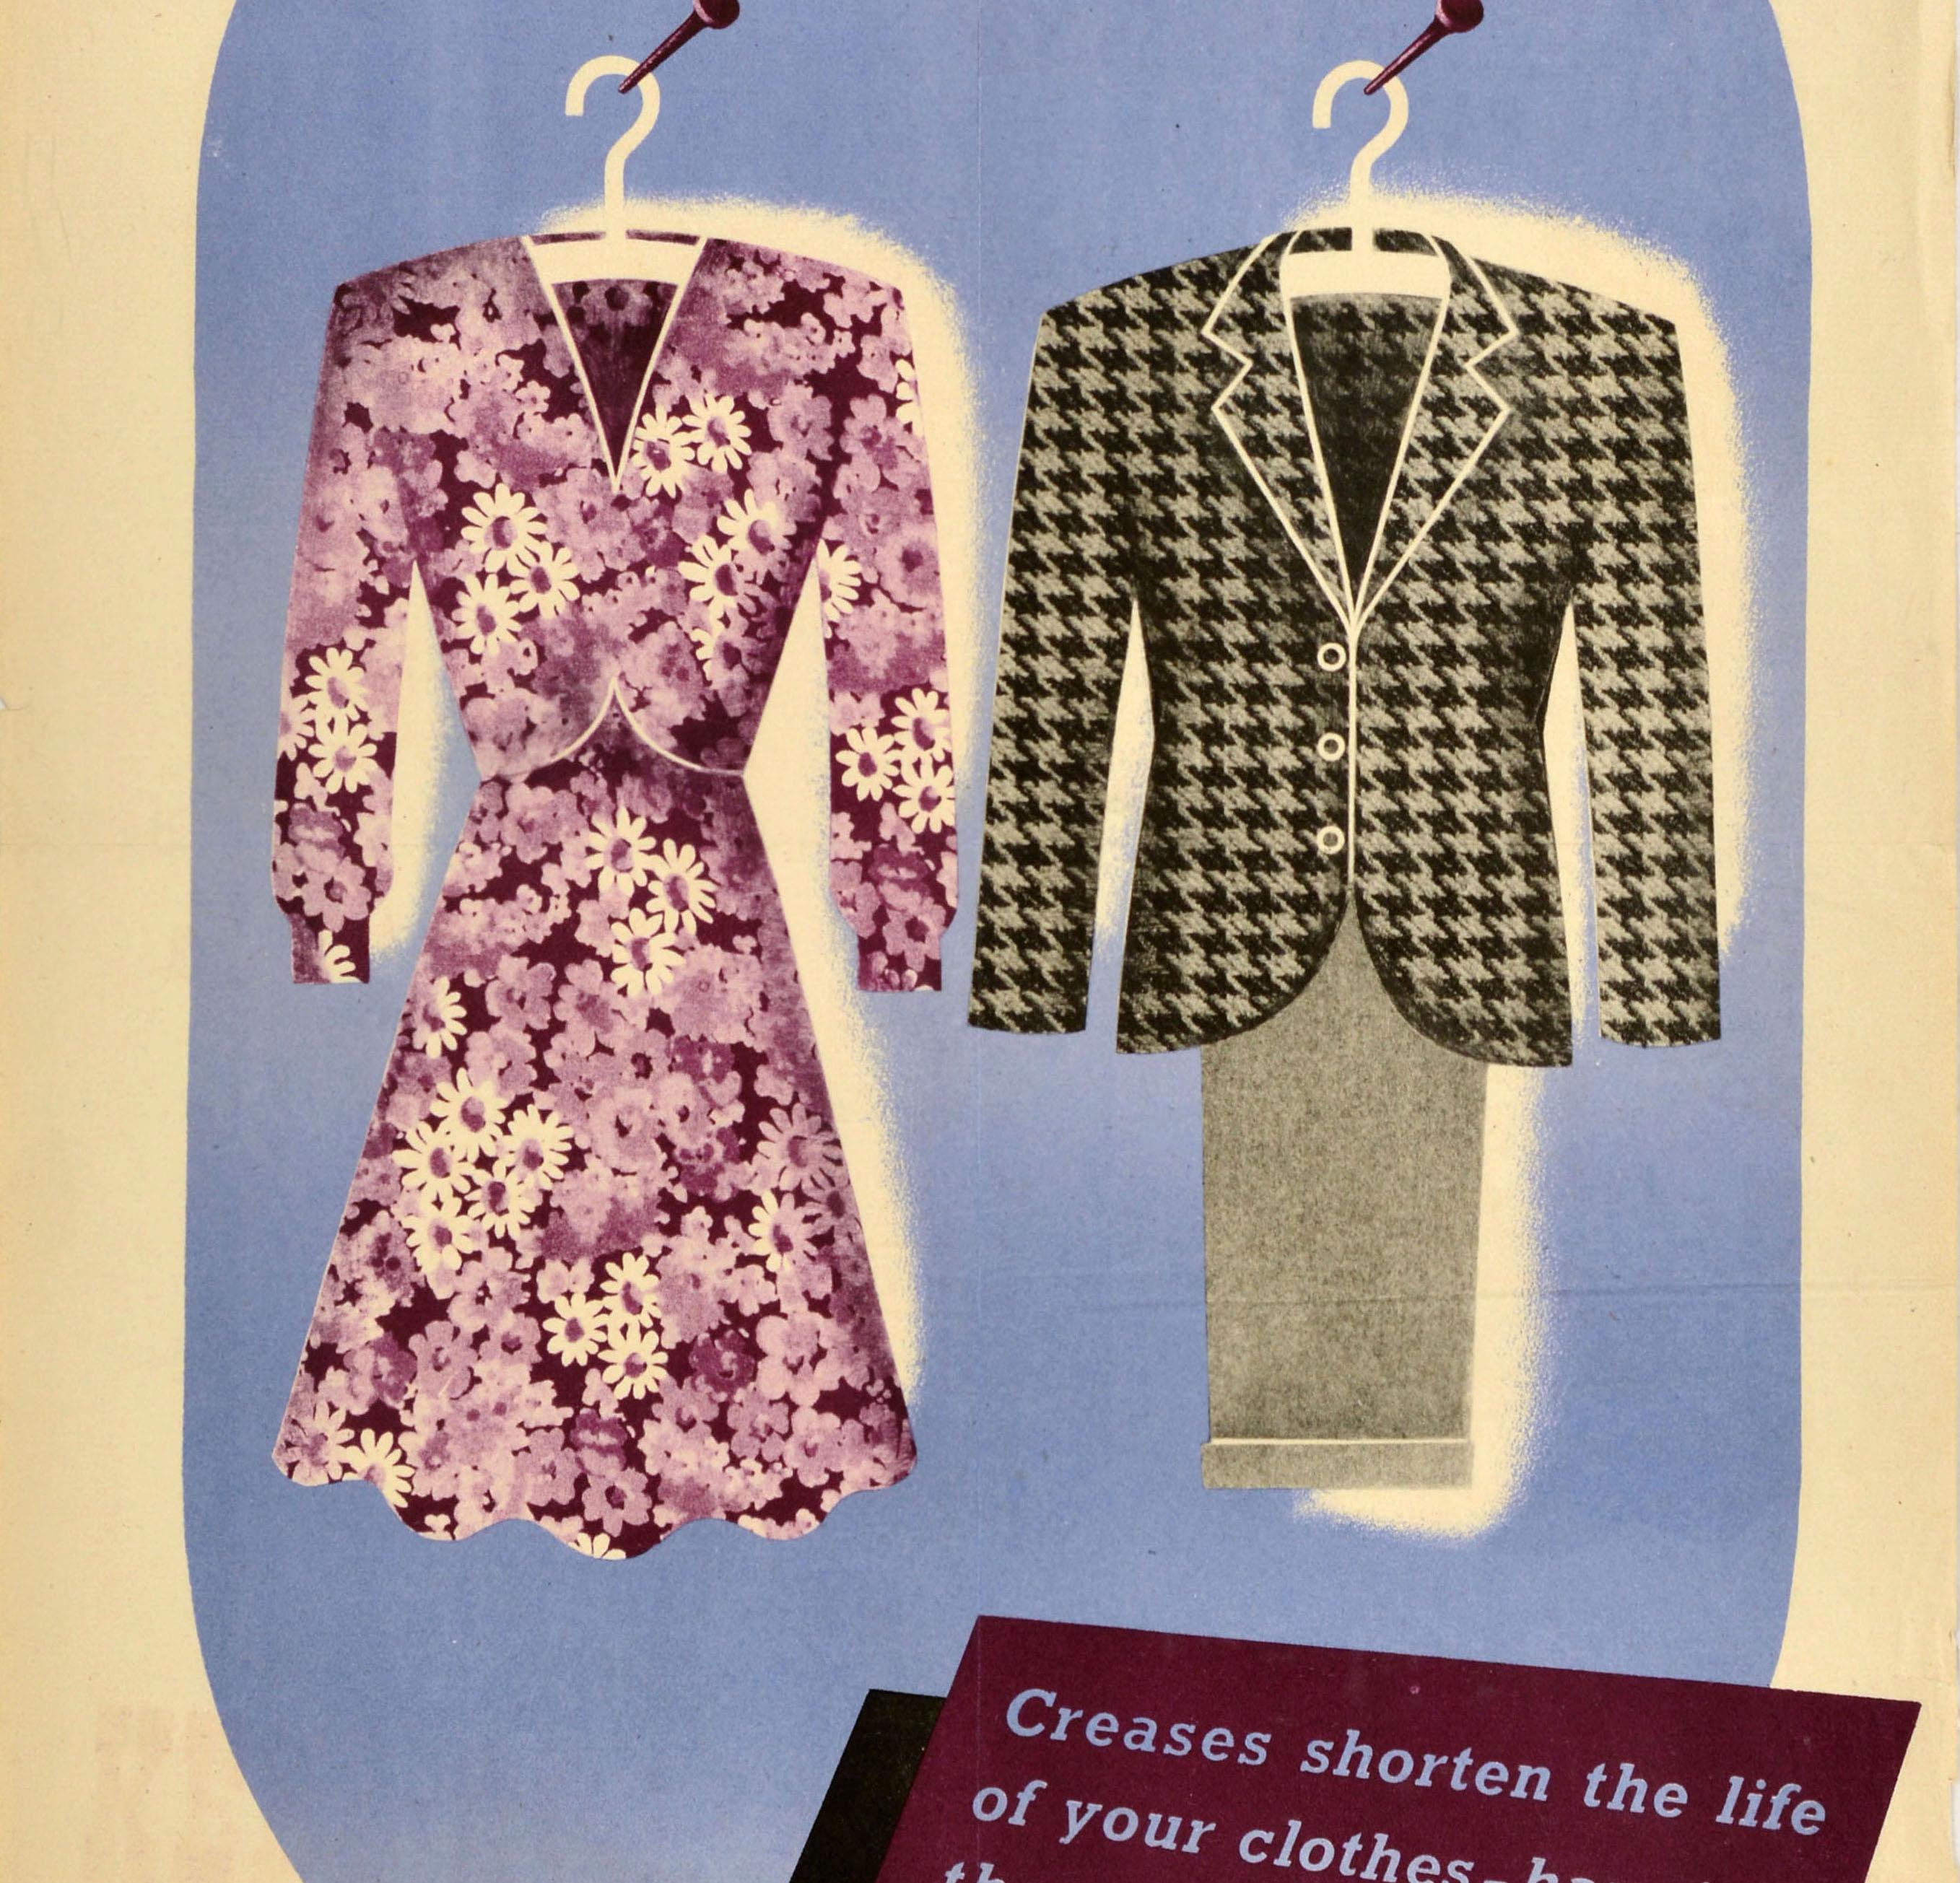 Original vintage World War Two home front poster - Keep Clothes On Hangers Creases shorten the life of your clothes hanging them up, brushed and pressed, saves coupons - featuring an image of a floral dress and a suit on clothes hangers, the make do